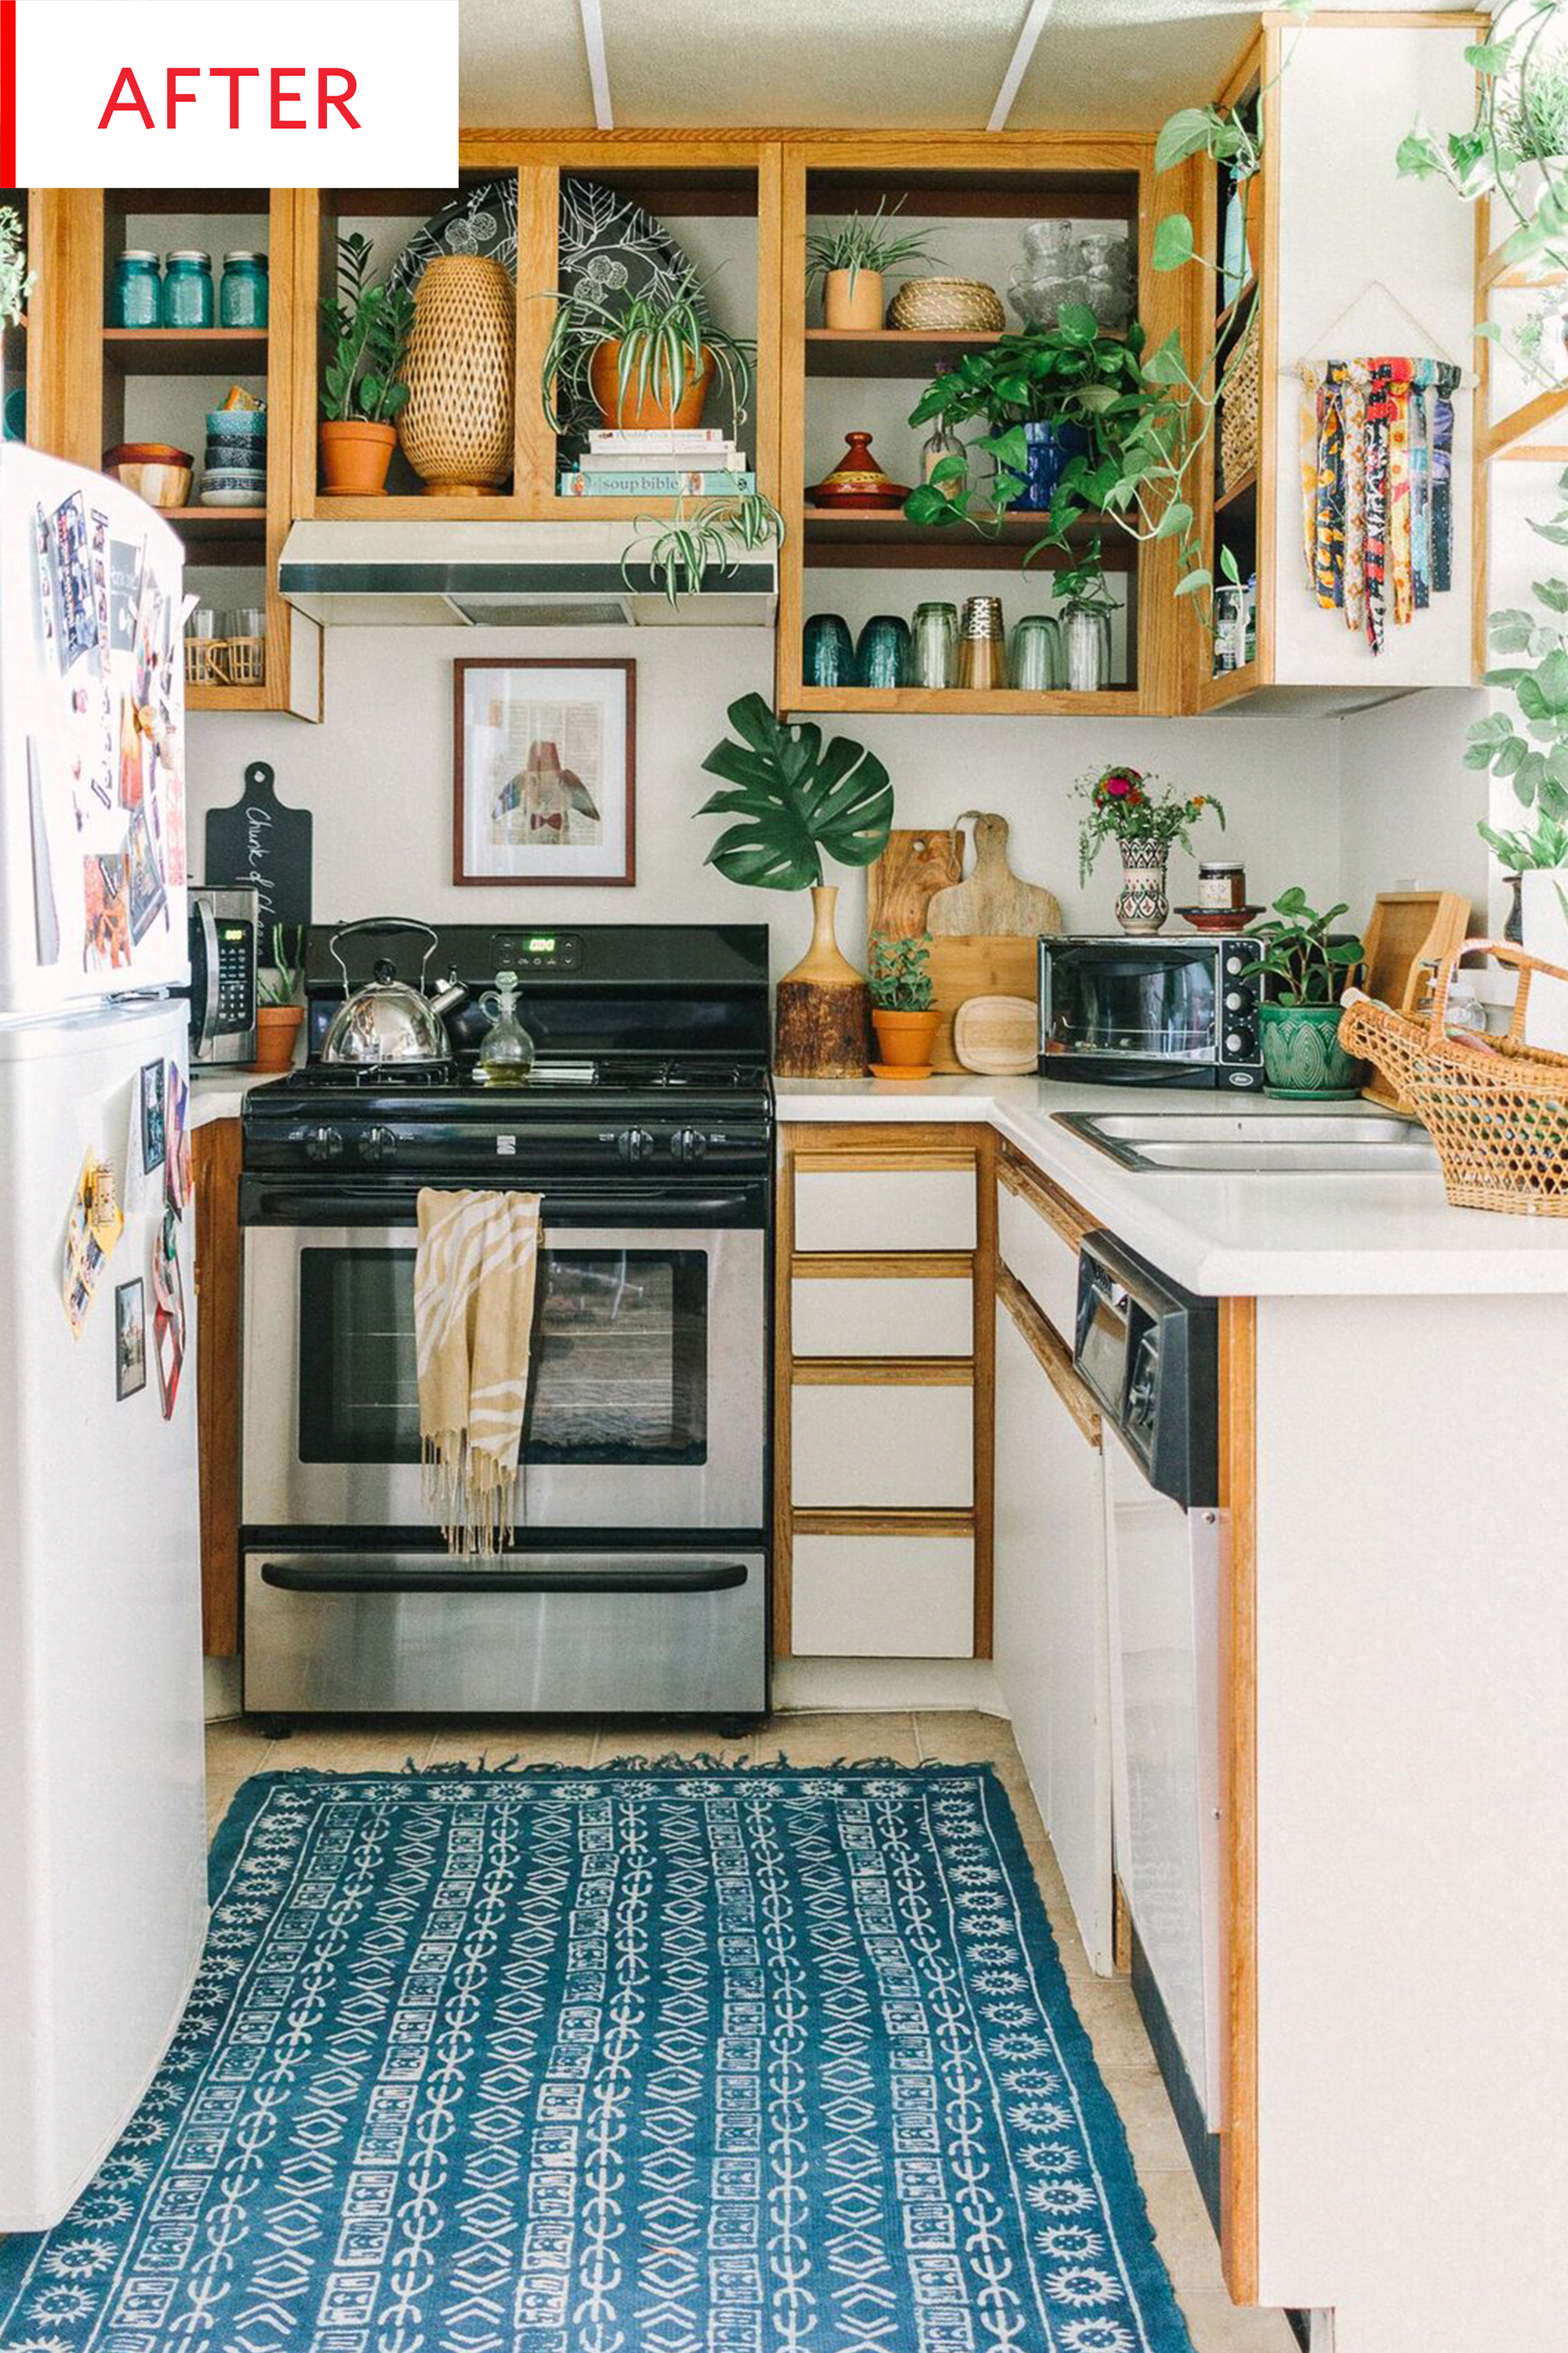 10 of the Most Popular Farmhouse Kitchens on Apartment Therapy